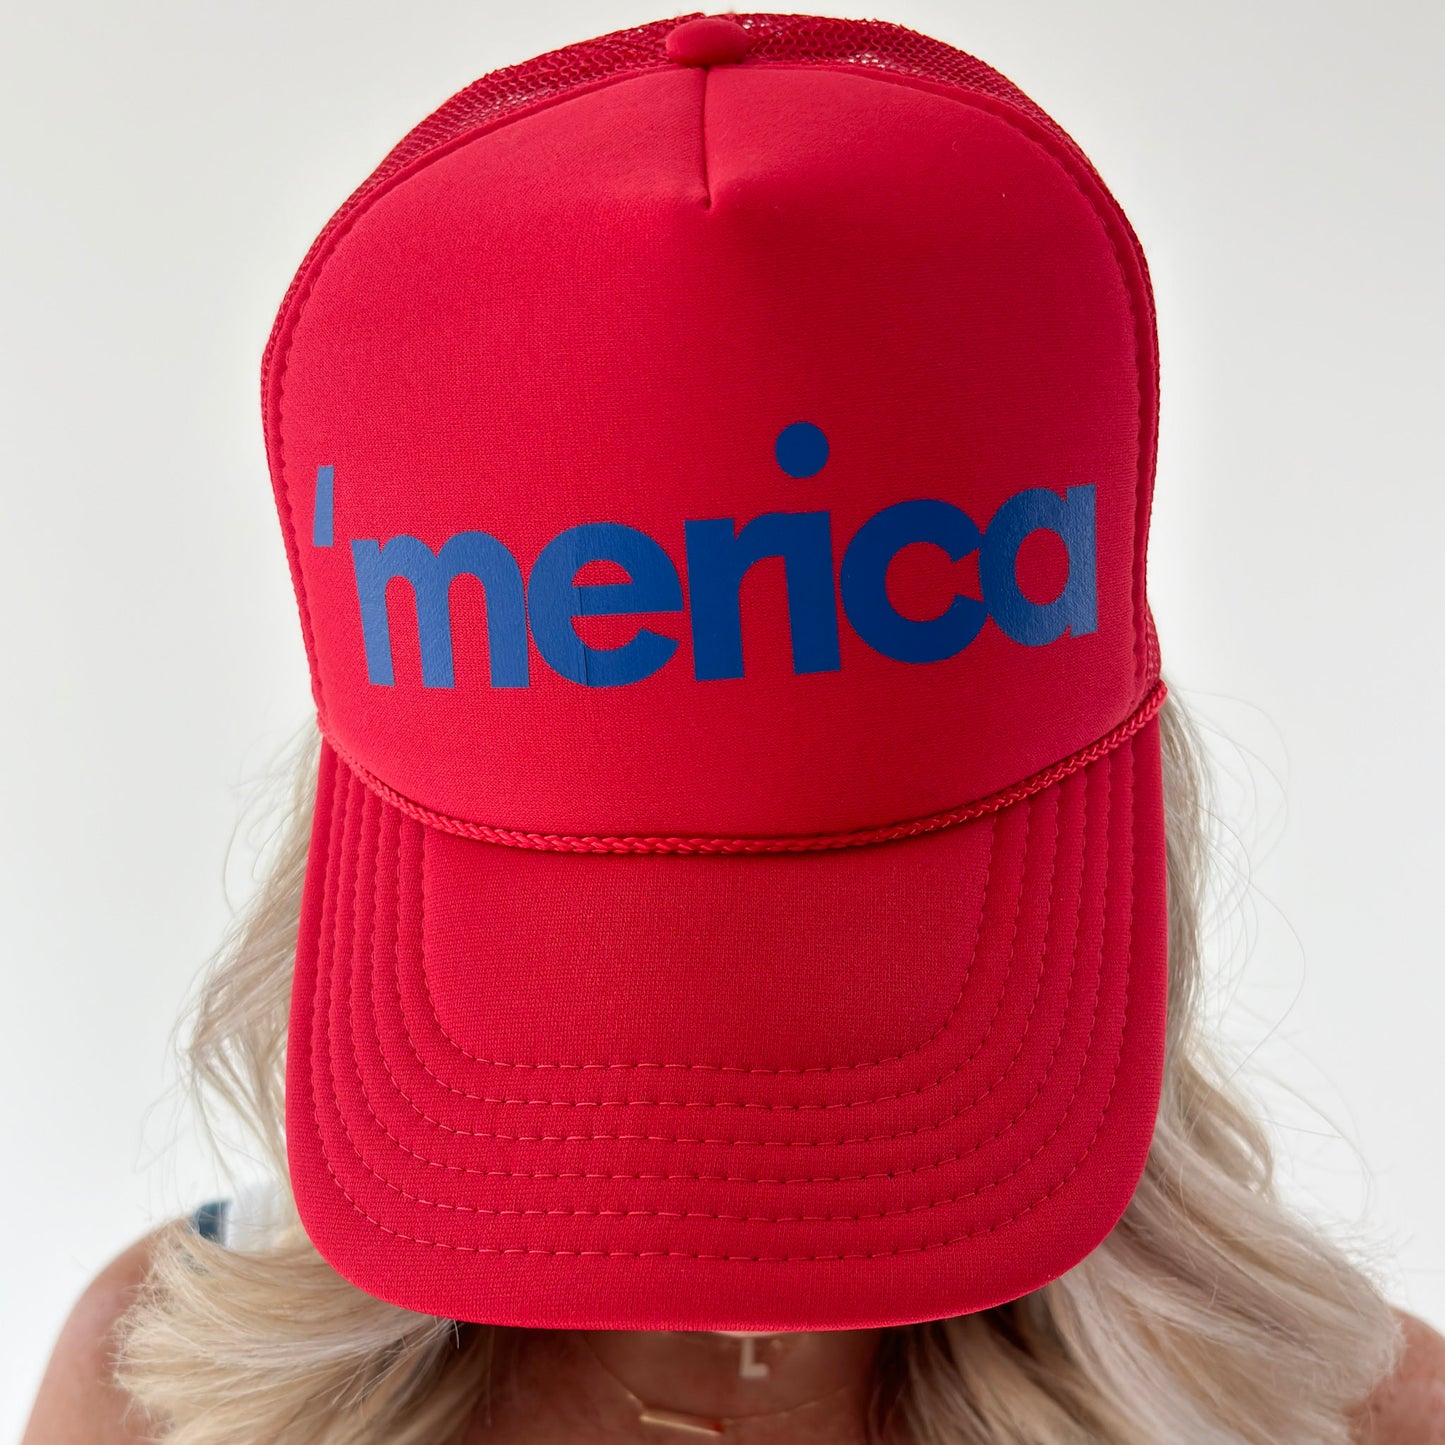 Women's mid profile foam bright red trucker hat with blue 'merica printed graphic